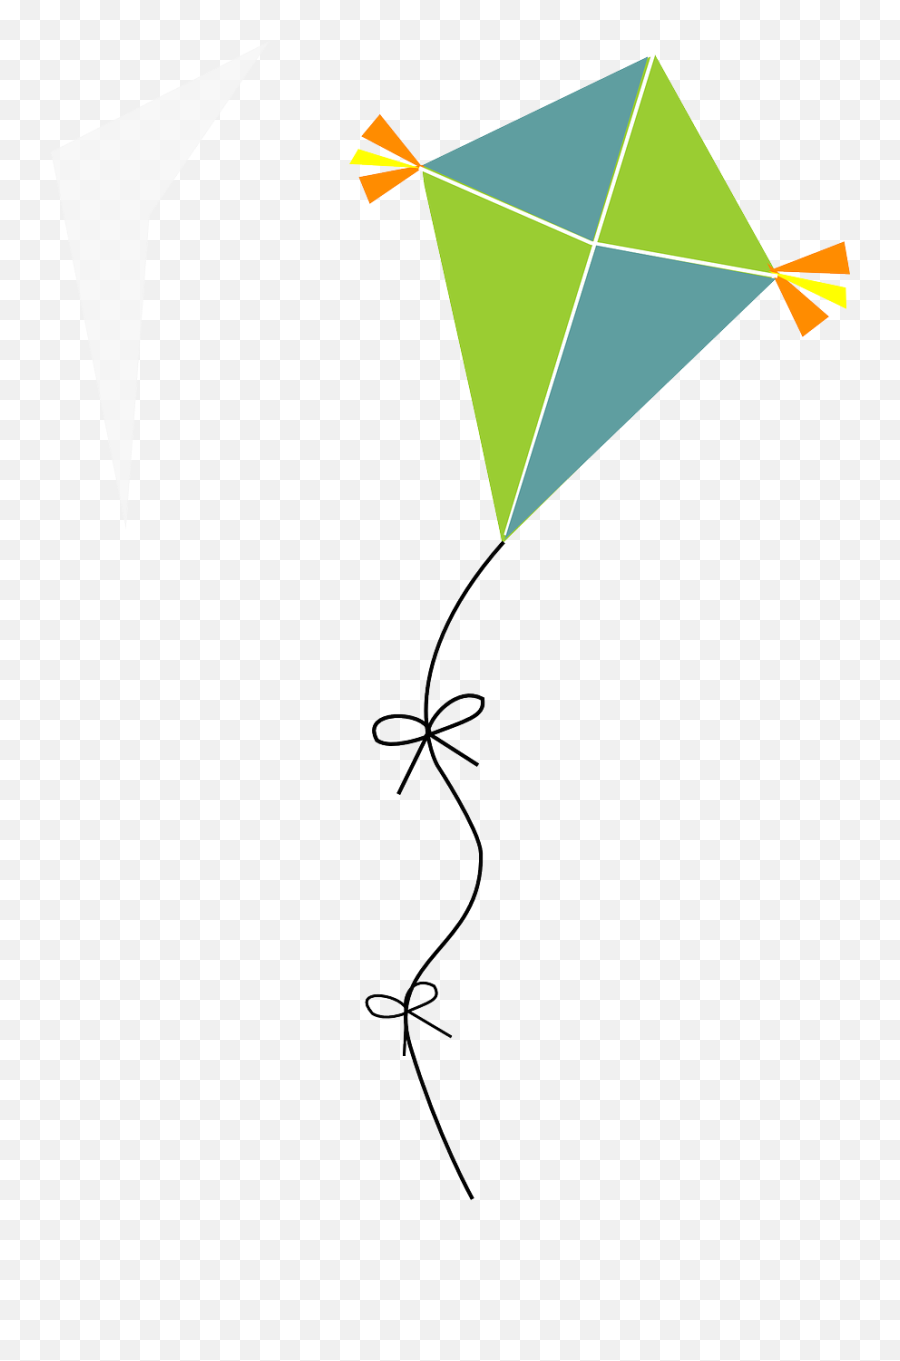 Green Blue Orange - Free Vector Graphic On Pixabay Kite Png Clipart,Green Png